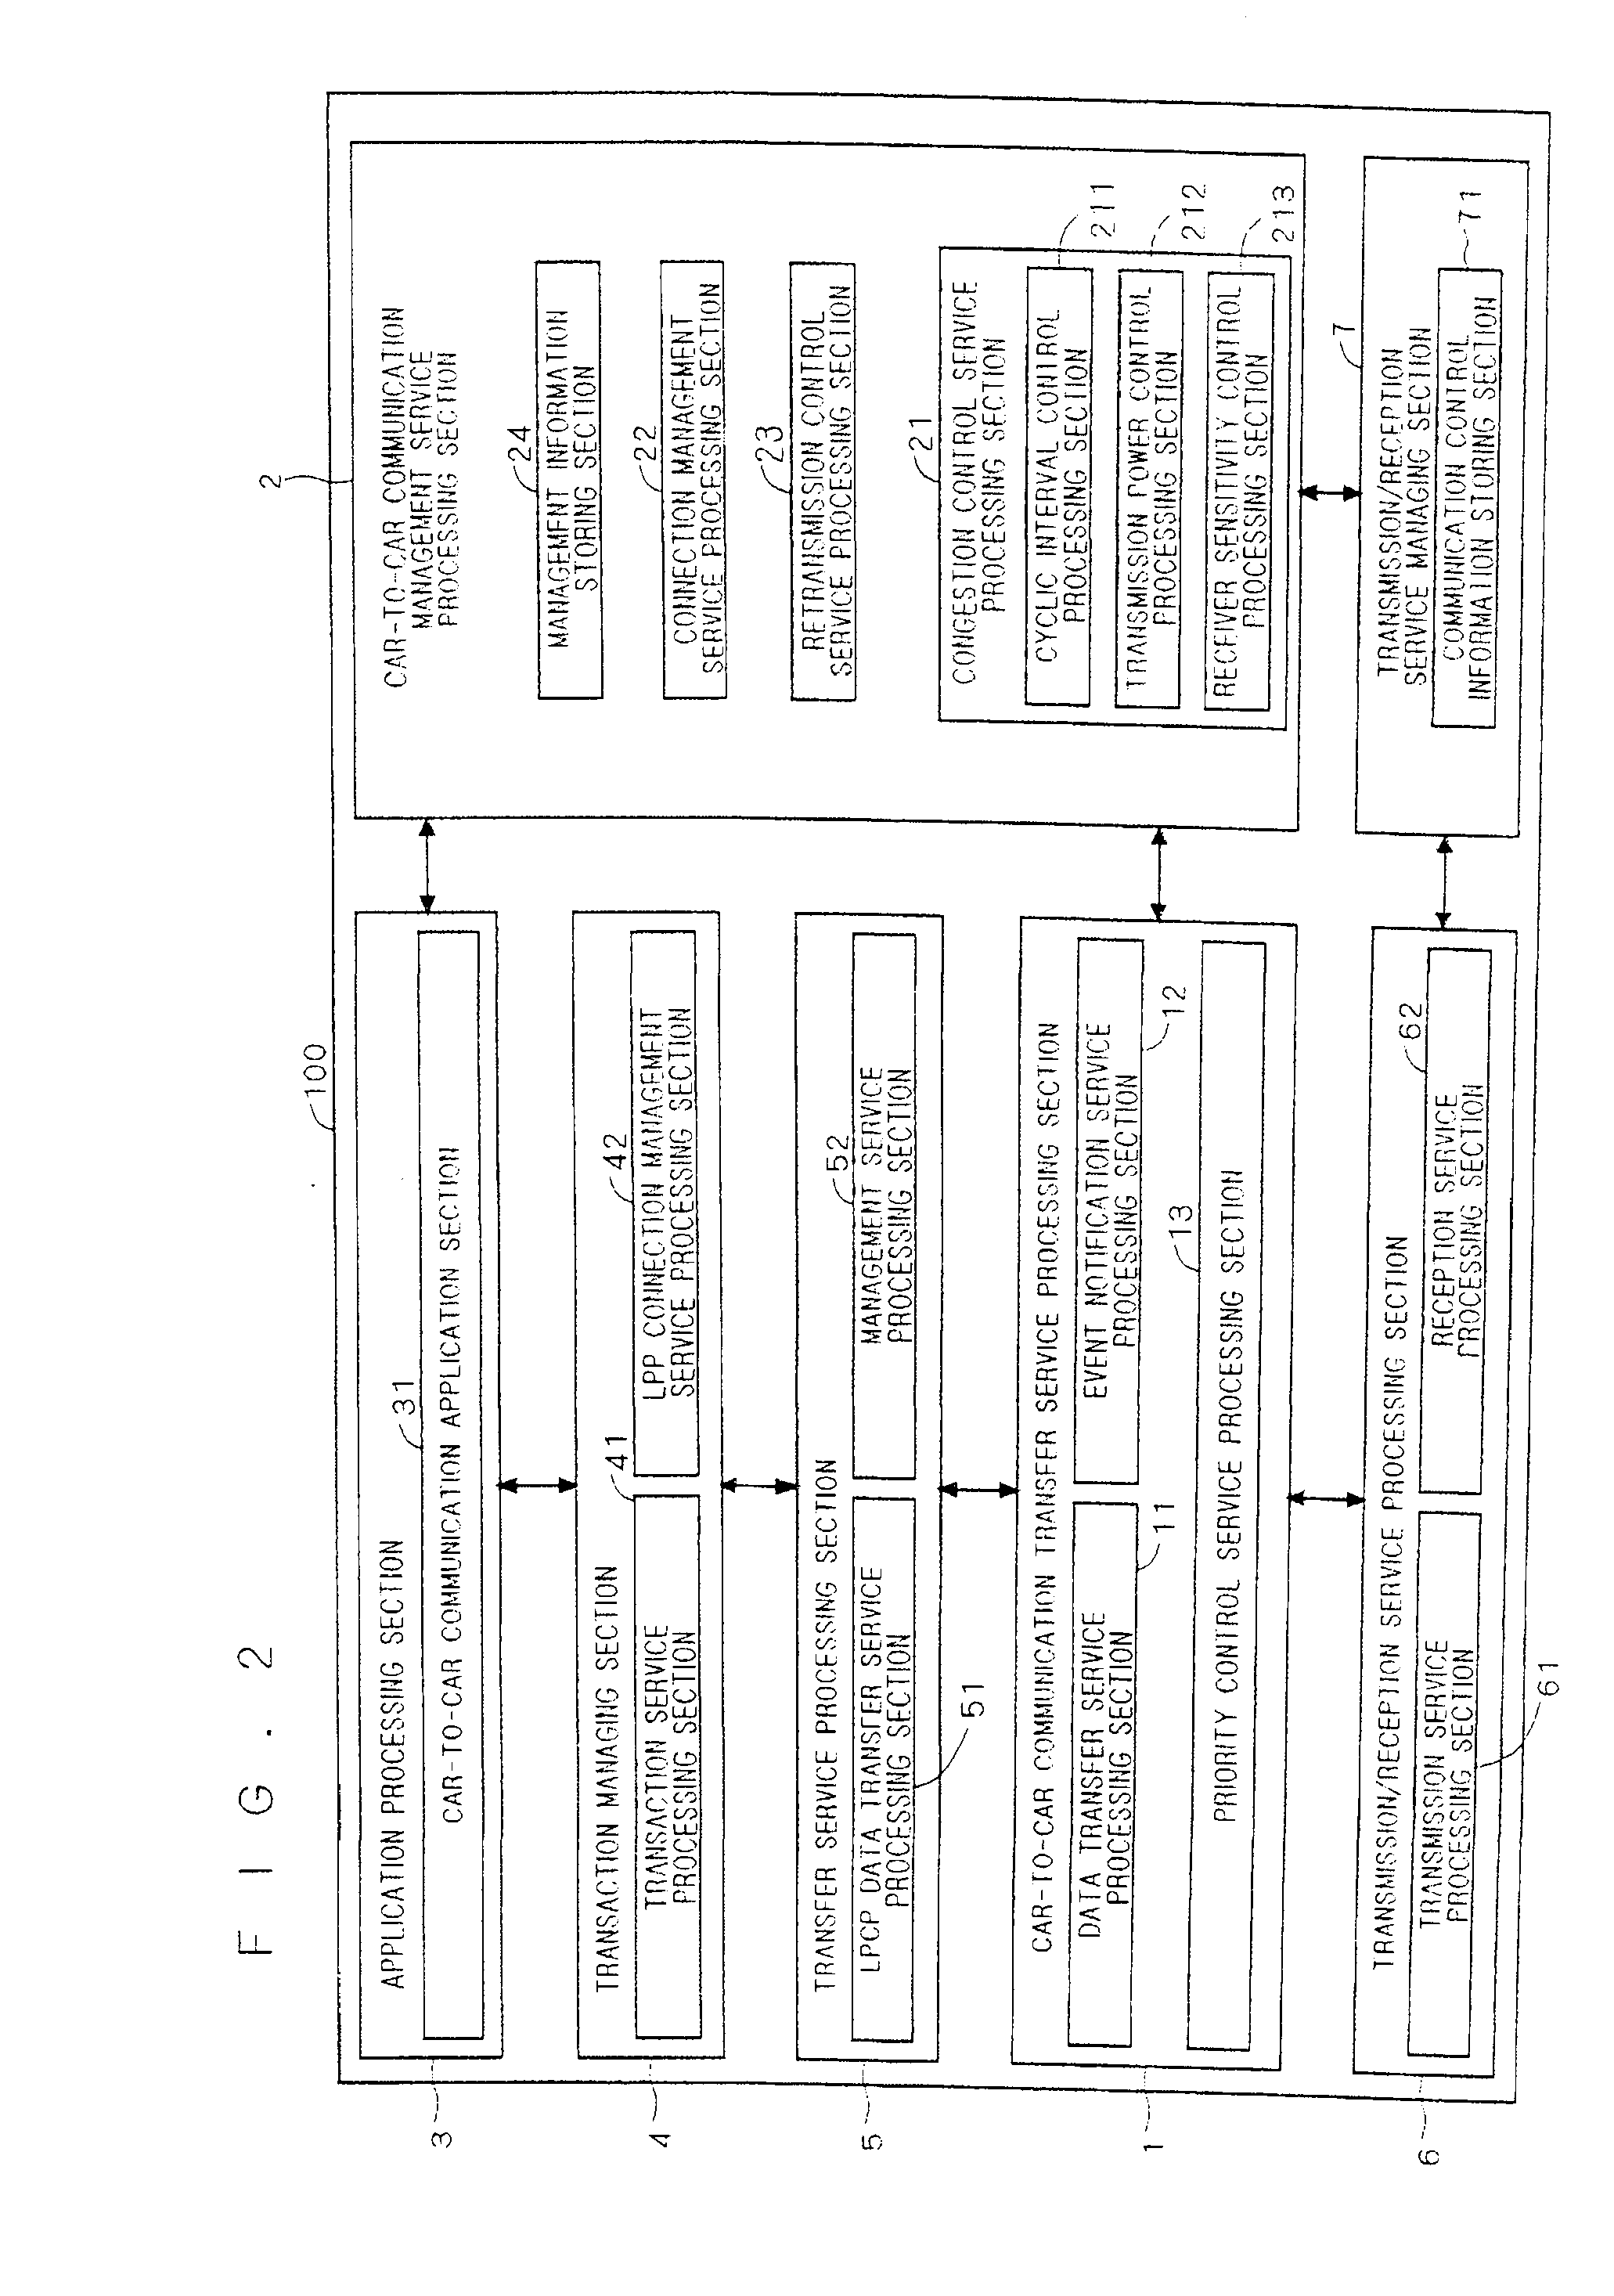 On-board communication device and cooperative road-to-vehicle/vehicle-to-vehicle communication system